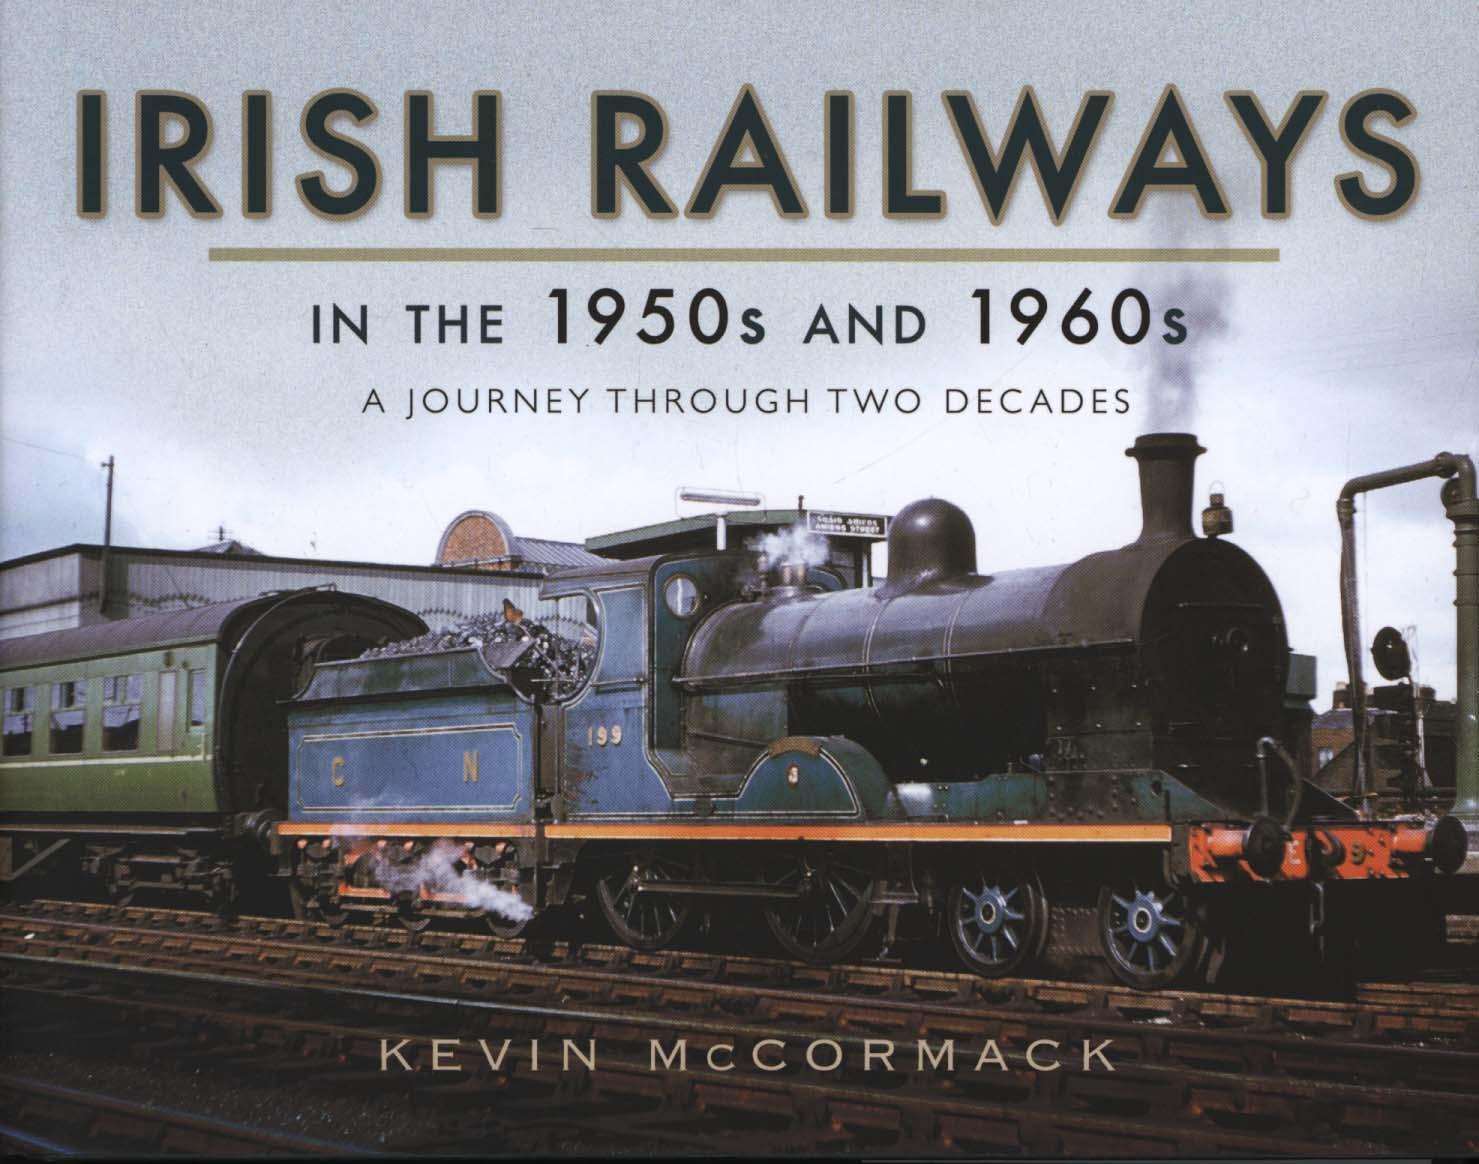 Irish Railways in the 1950s and 1960s - Kevin McCormack